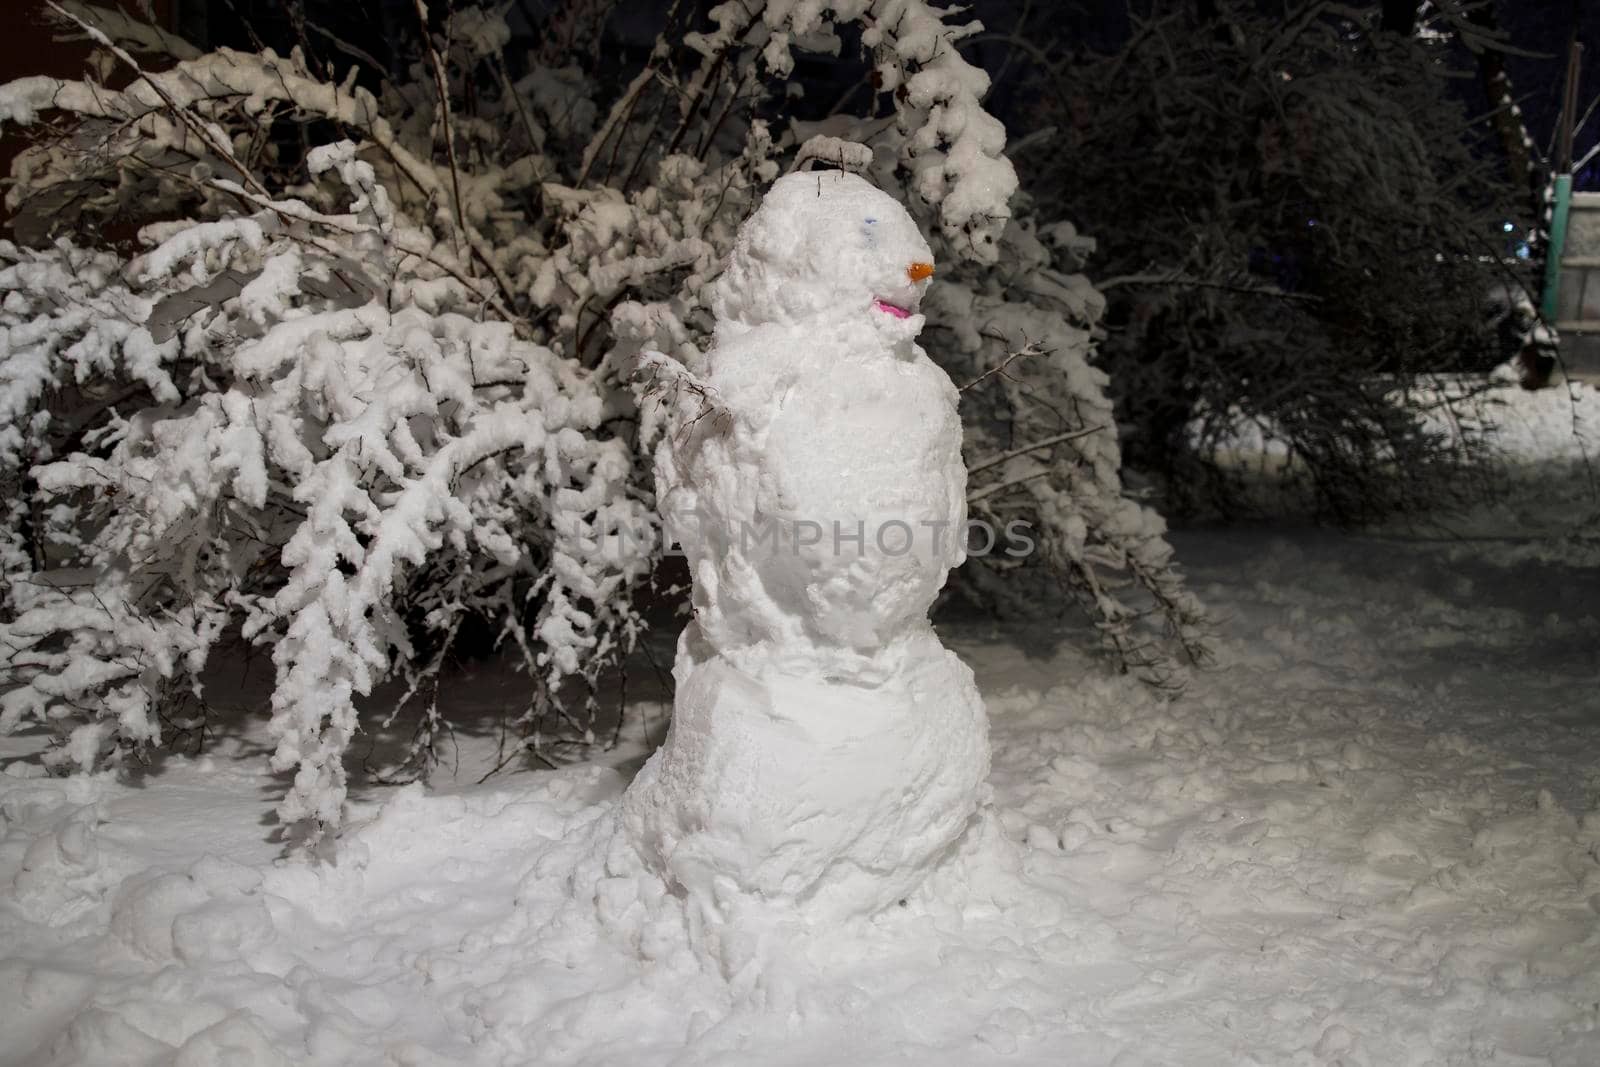 Snowman on the playground in the snowfall at night by elenarostunova